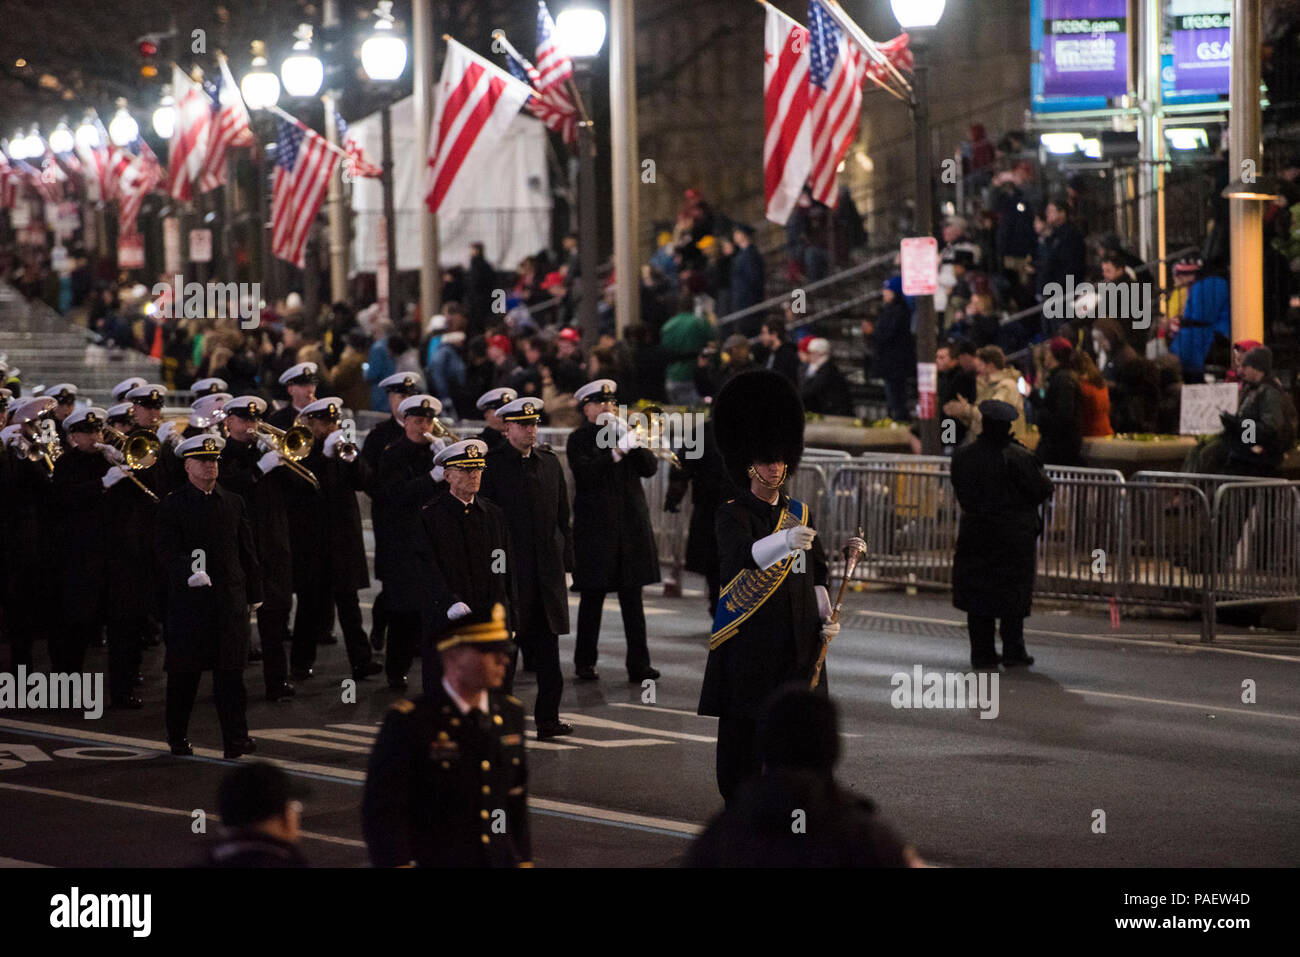 WASHINGTON (Jan. 20, 2017) The U.S. Navy Band marches down Pennsylvania Avenue during the 58th Presidential Inaugural Parade in Washington, D.C.  The Parade was held to celebrate the inauguration of the 45th President of the United States President Donald Trump. Stock Photo